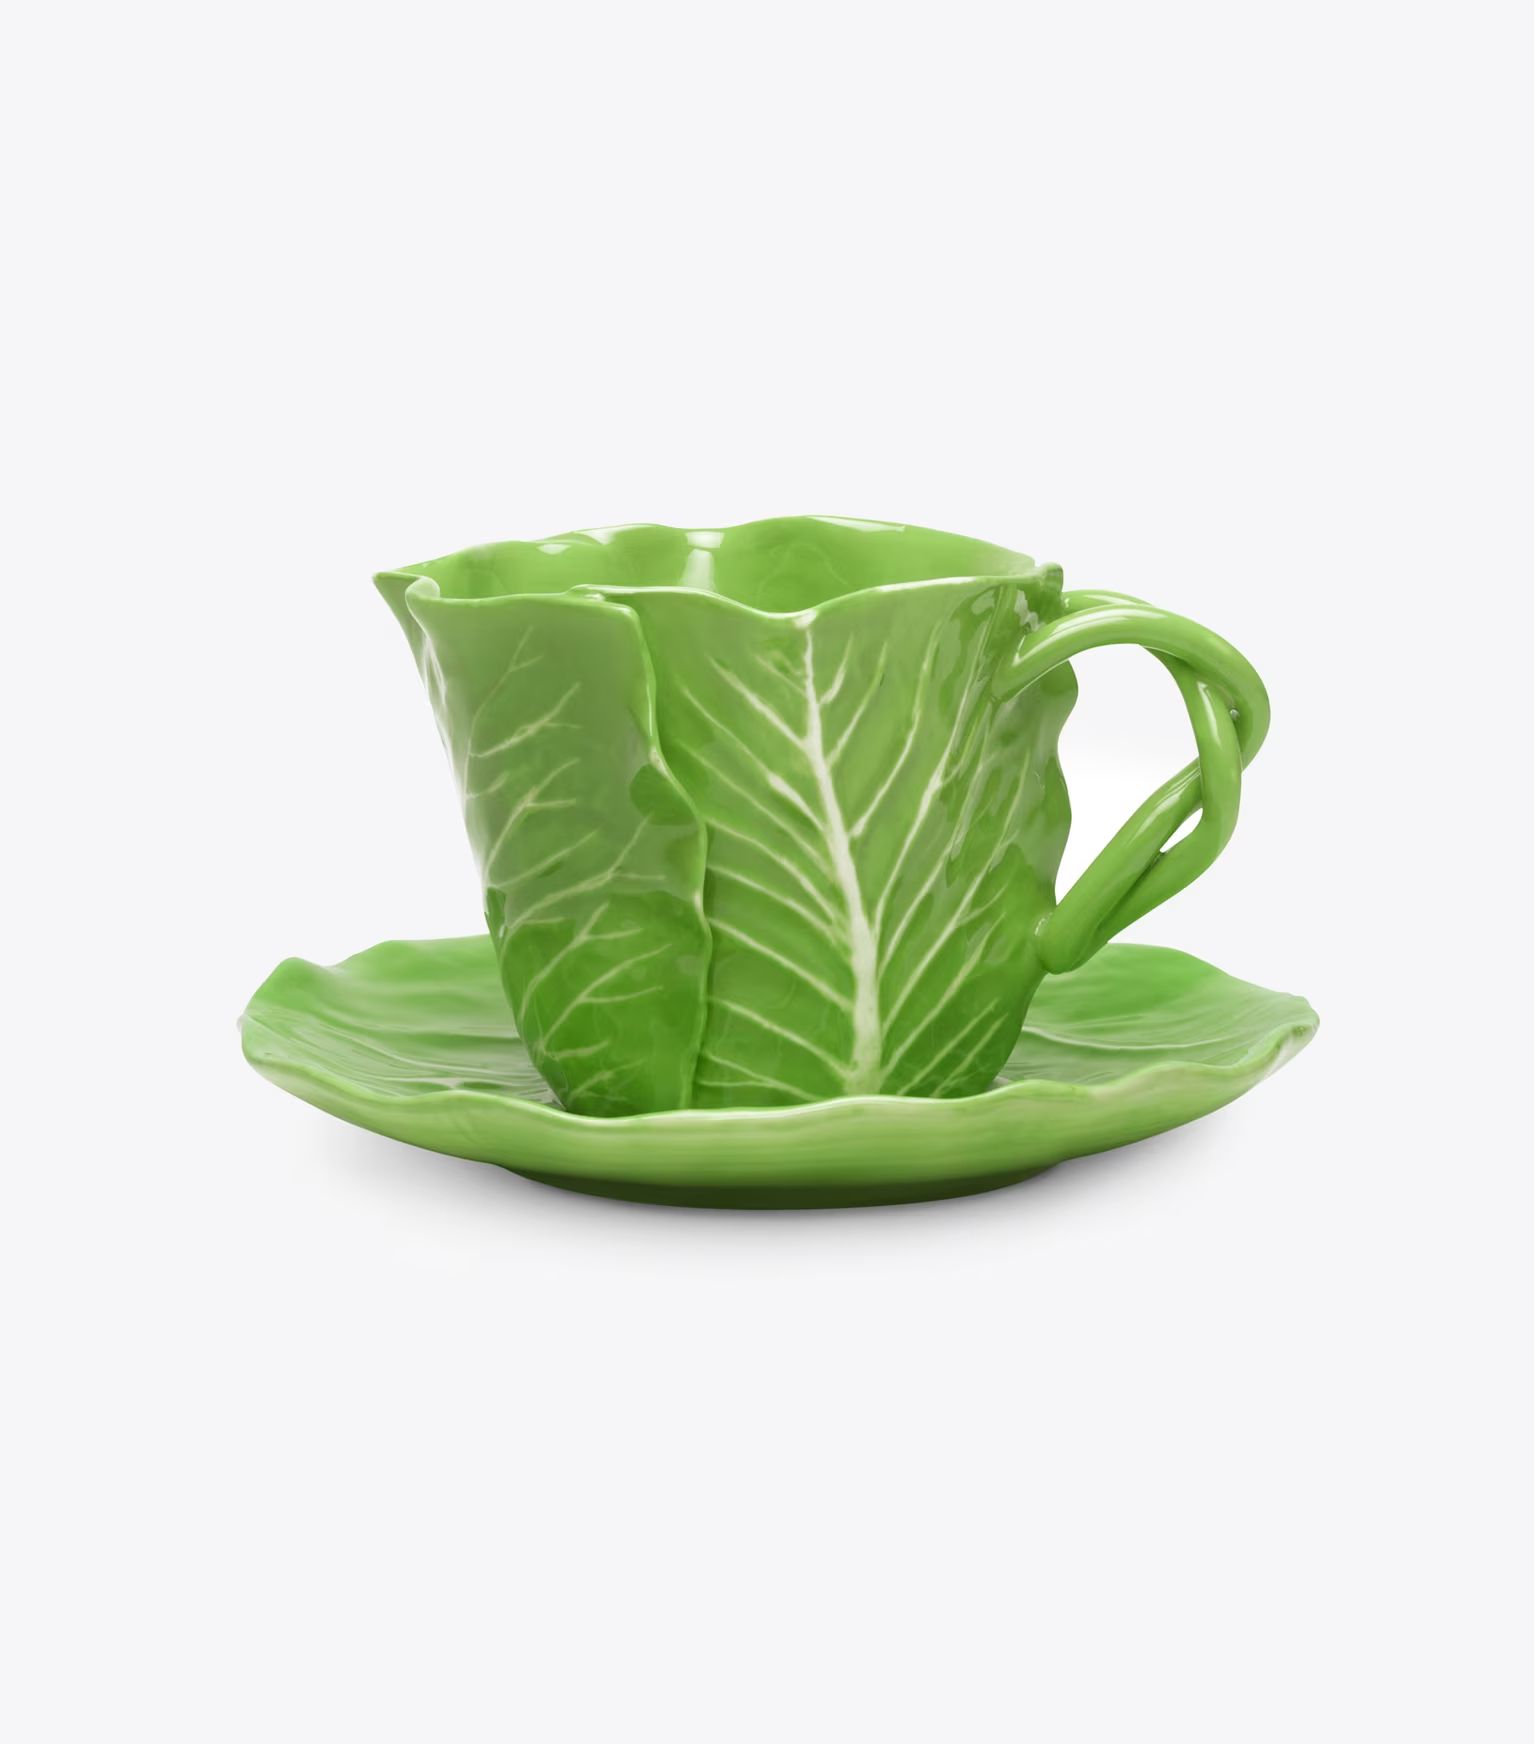 LETTUCE WARE CUP & SAUCER, SET OF 2 | Tory Burch (US)